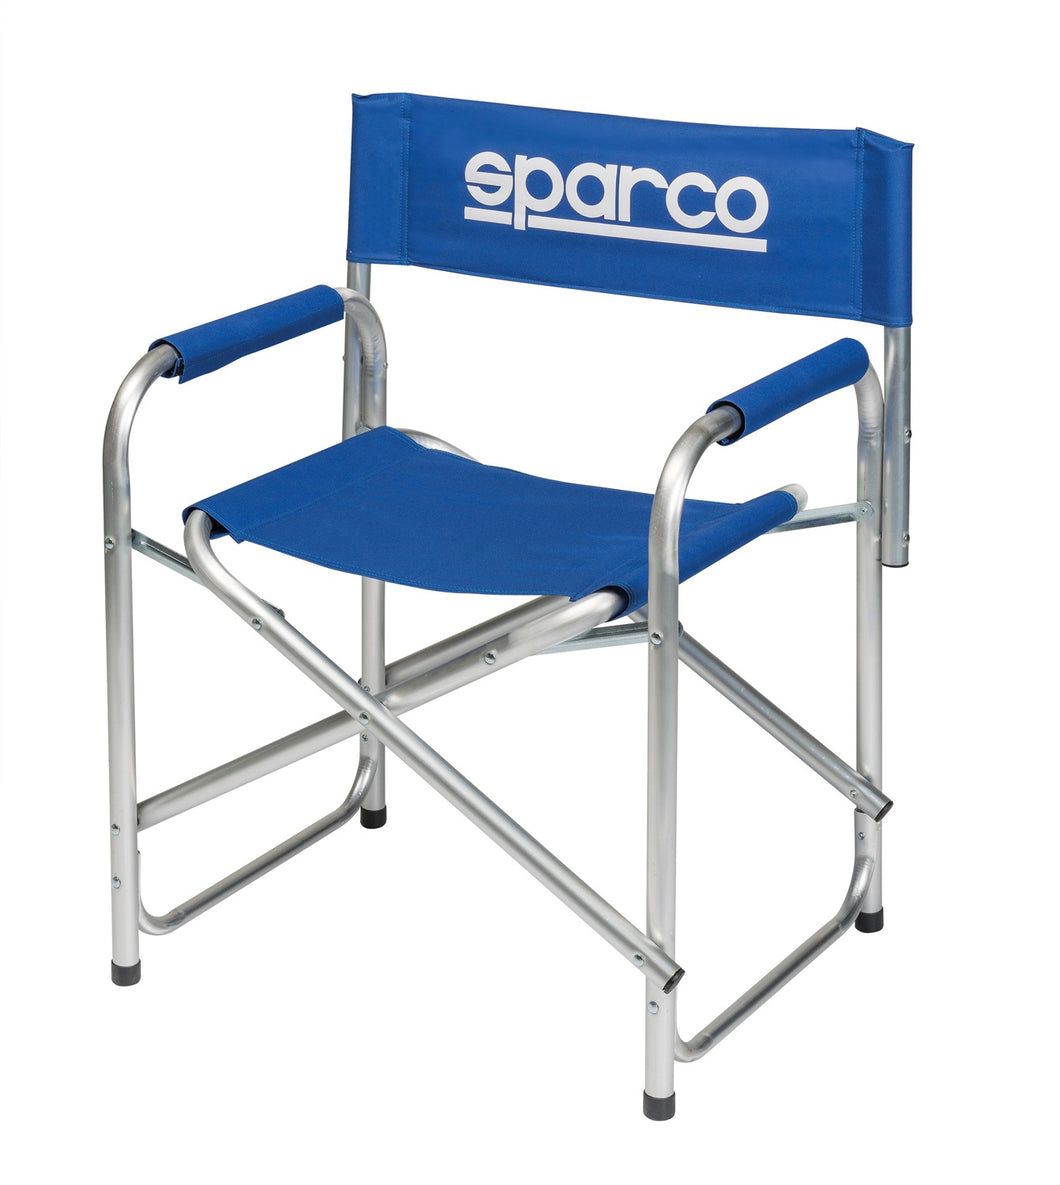 Sparco director's chair